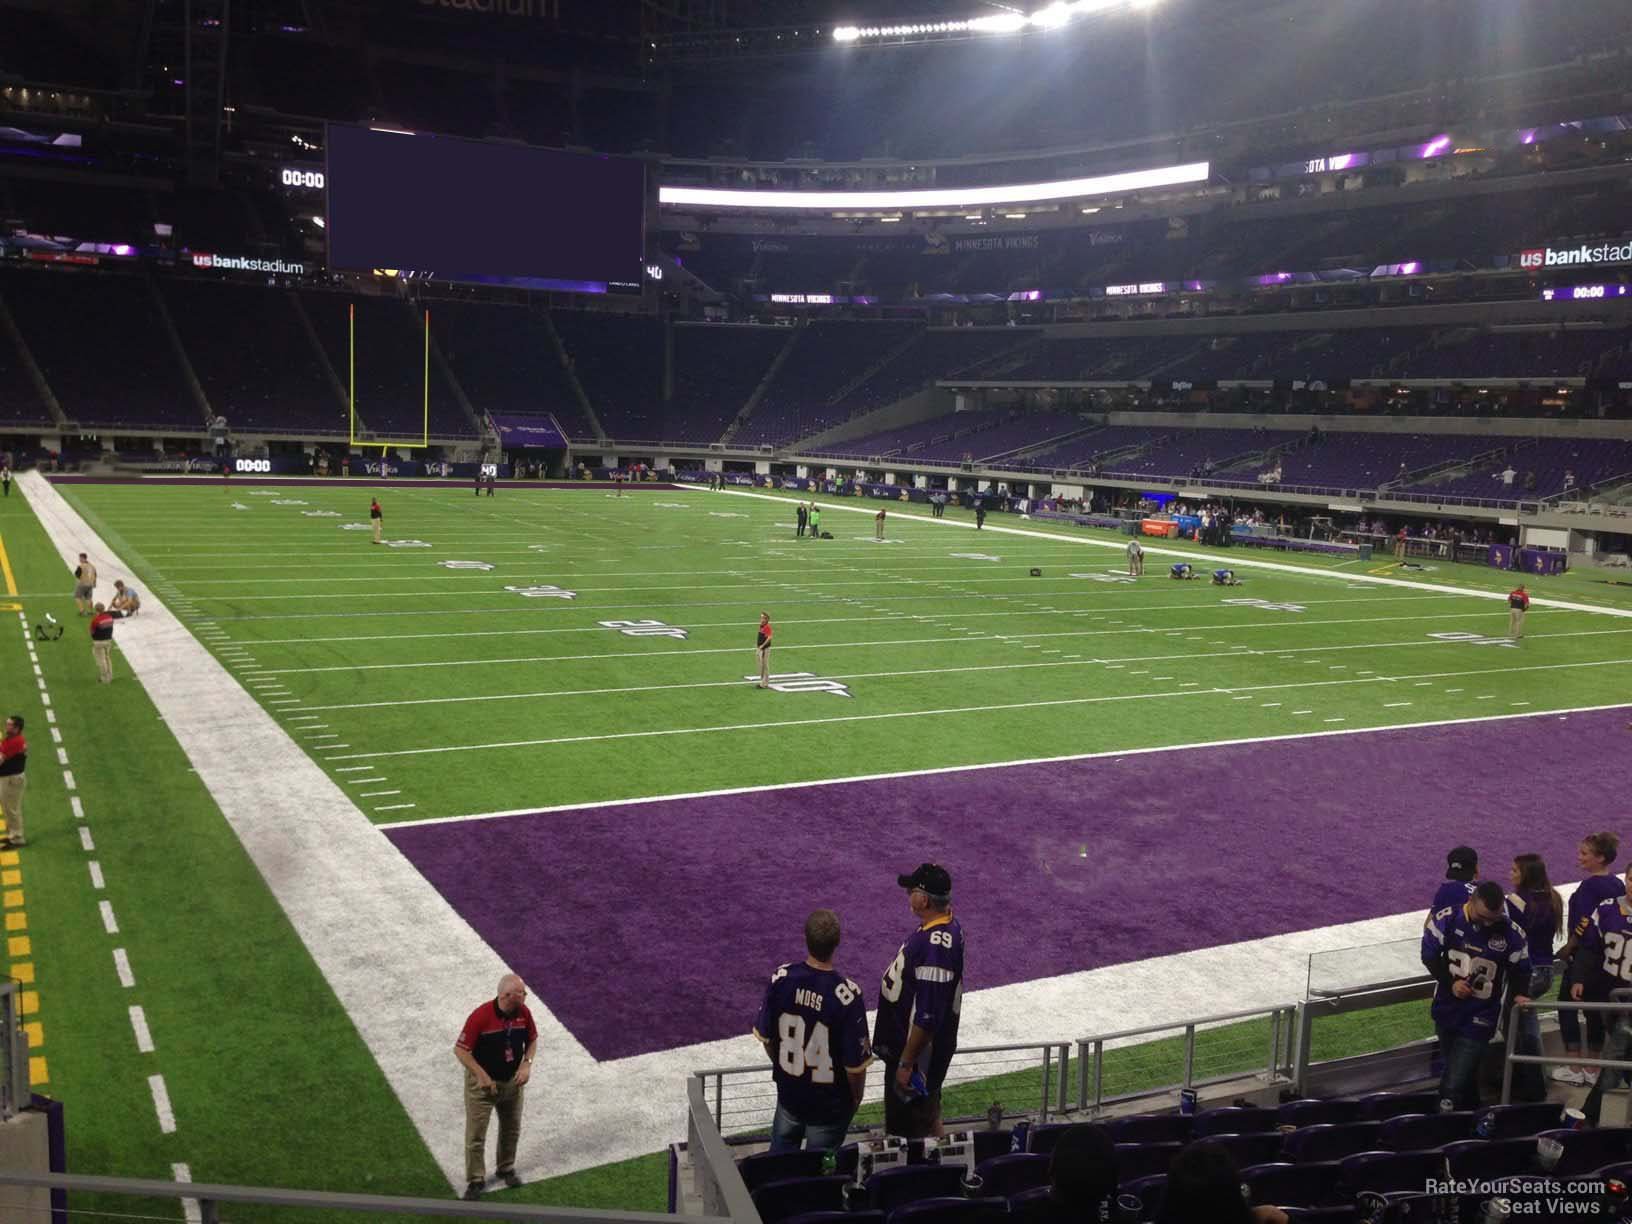 section 101, row 10 seat view  for football - u.s. bank stadium